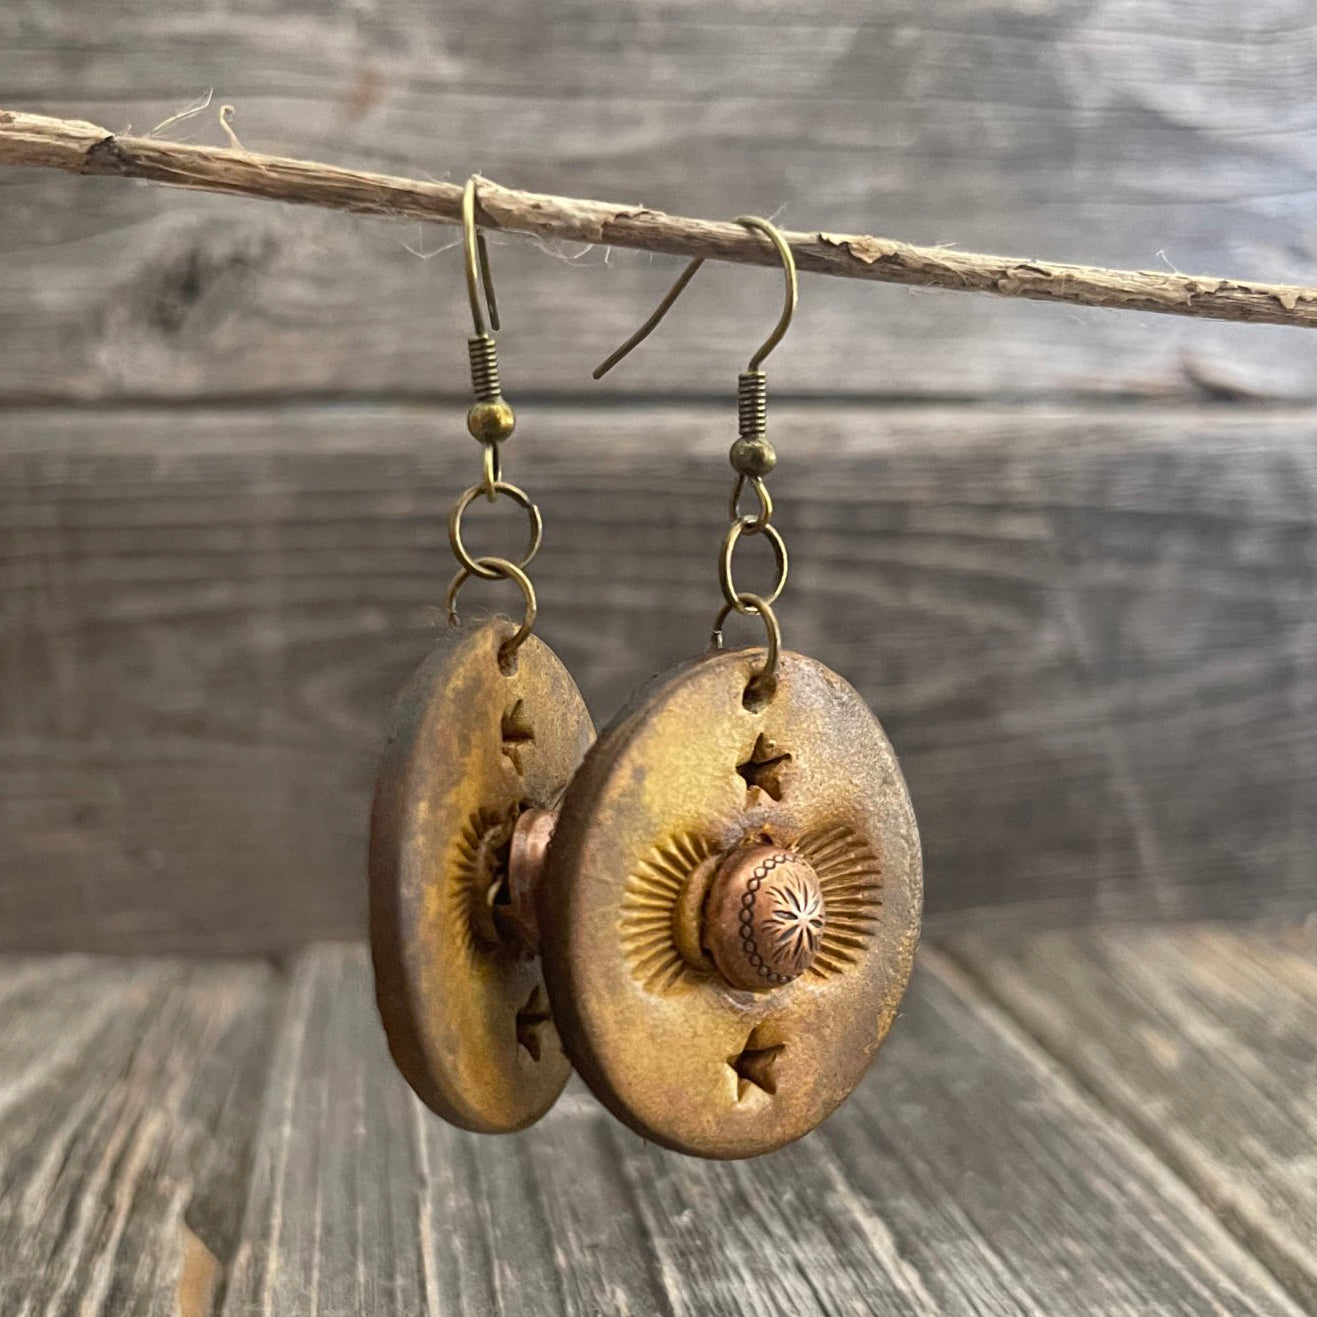 MADE TO ORDER - One of a Kind, genuine leather round drop boho earrings with copper rivet and tooled stars